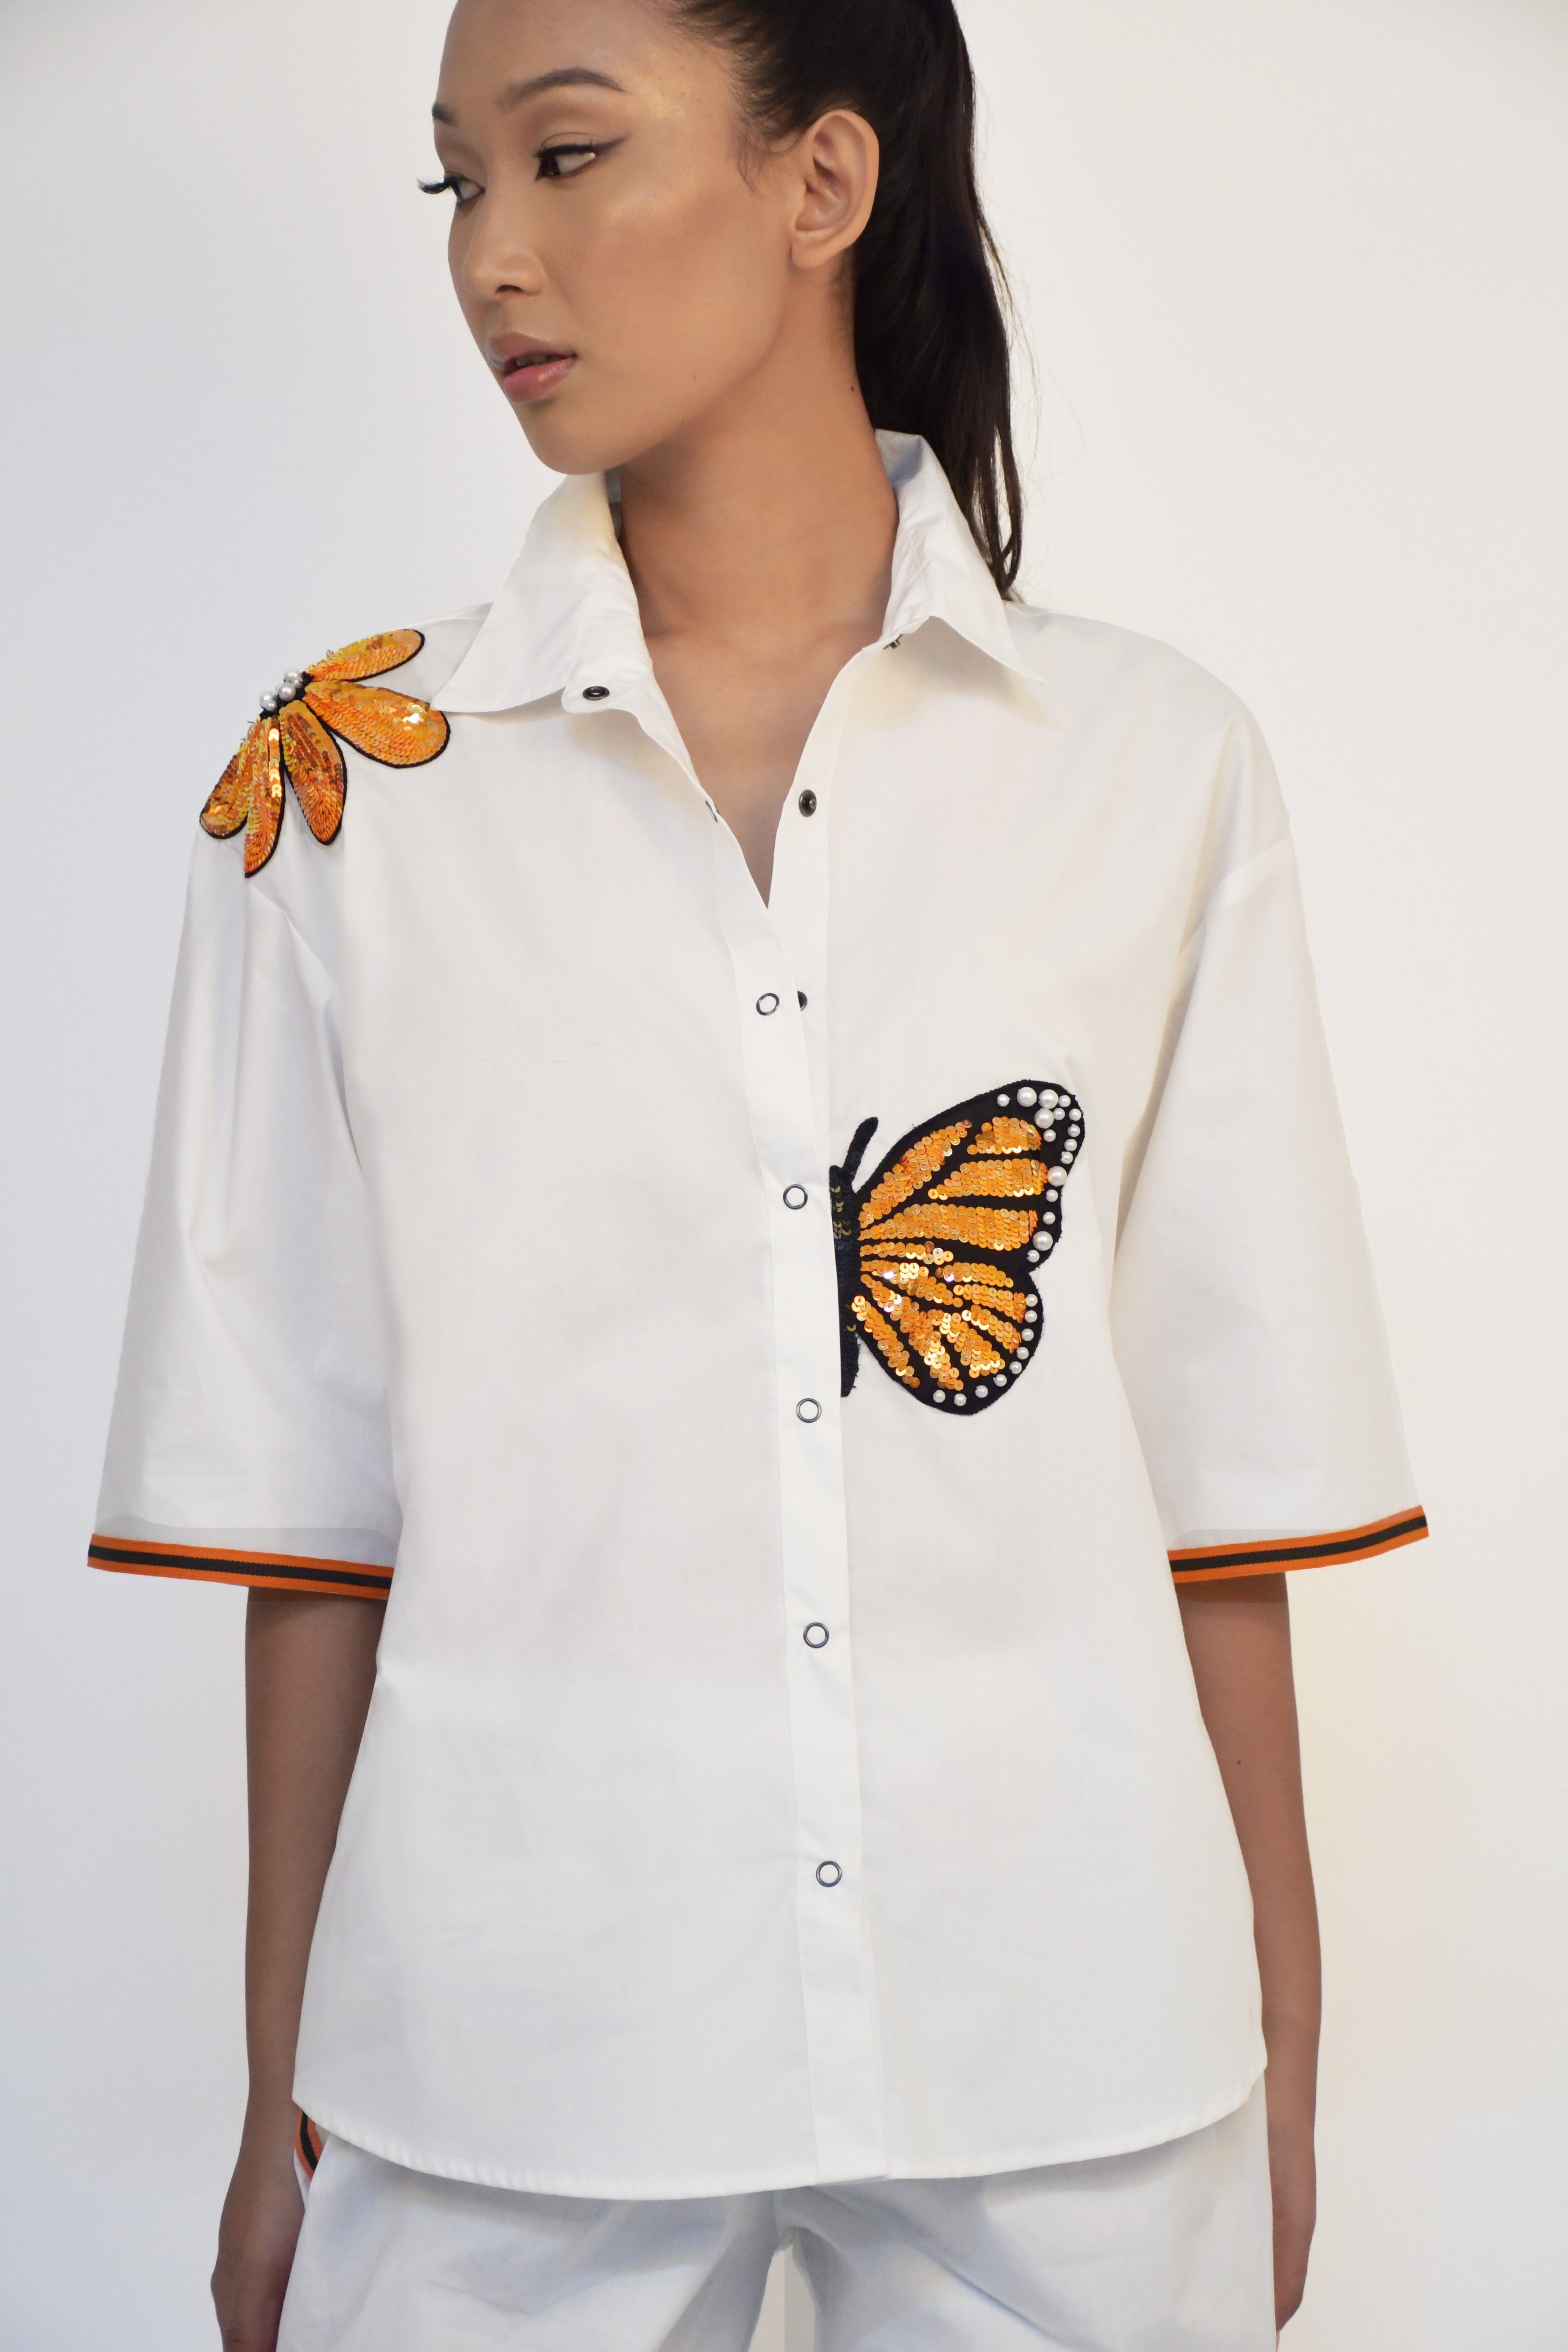 WHITE SHIRT  WITH ORANGE SMALL BUTTERFLY AND ORANGE FLOWER